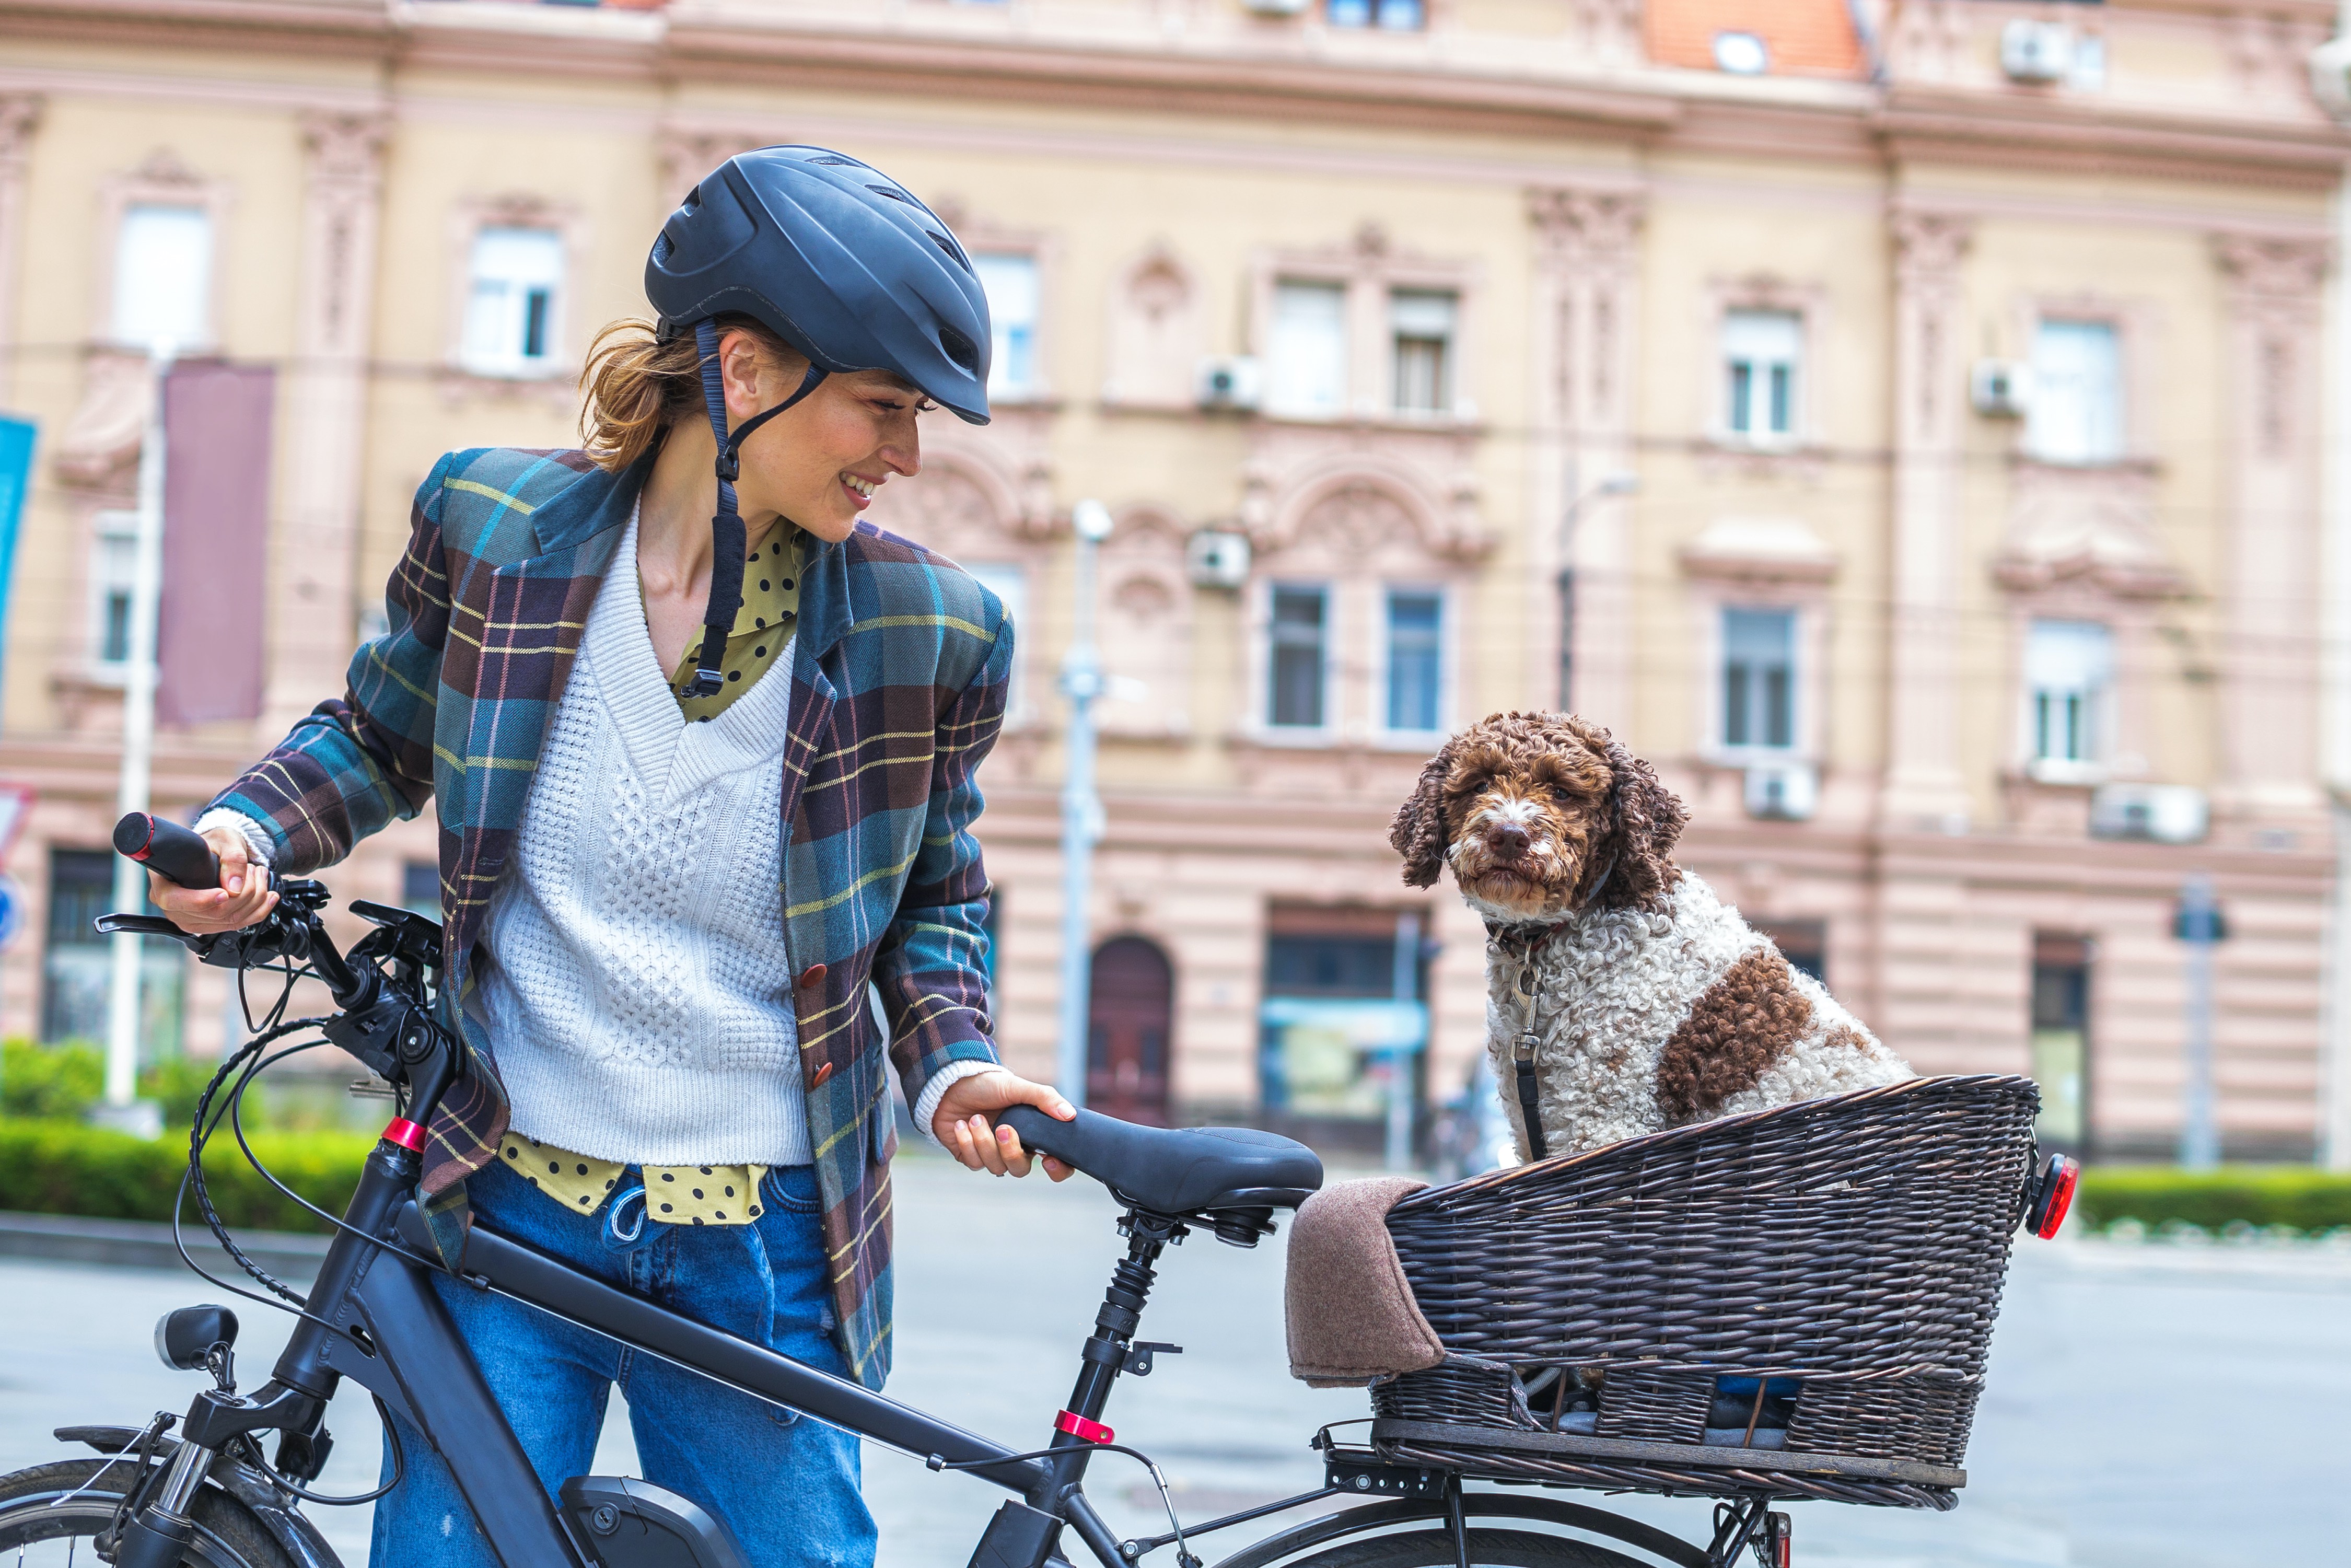 A woman with her dog in a bicycle basket